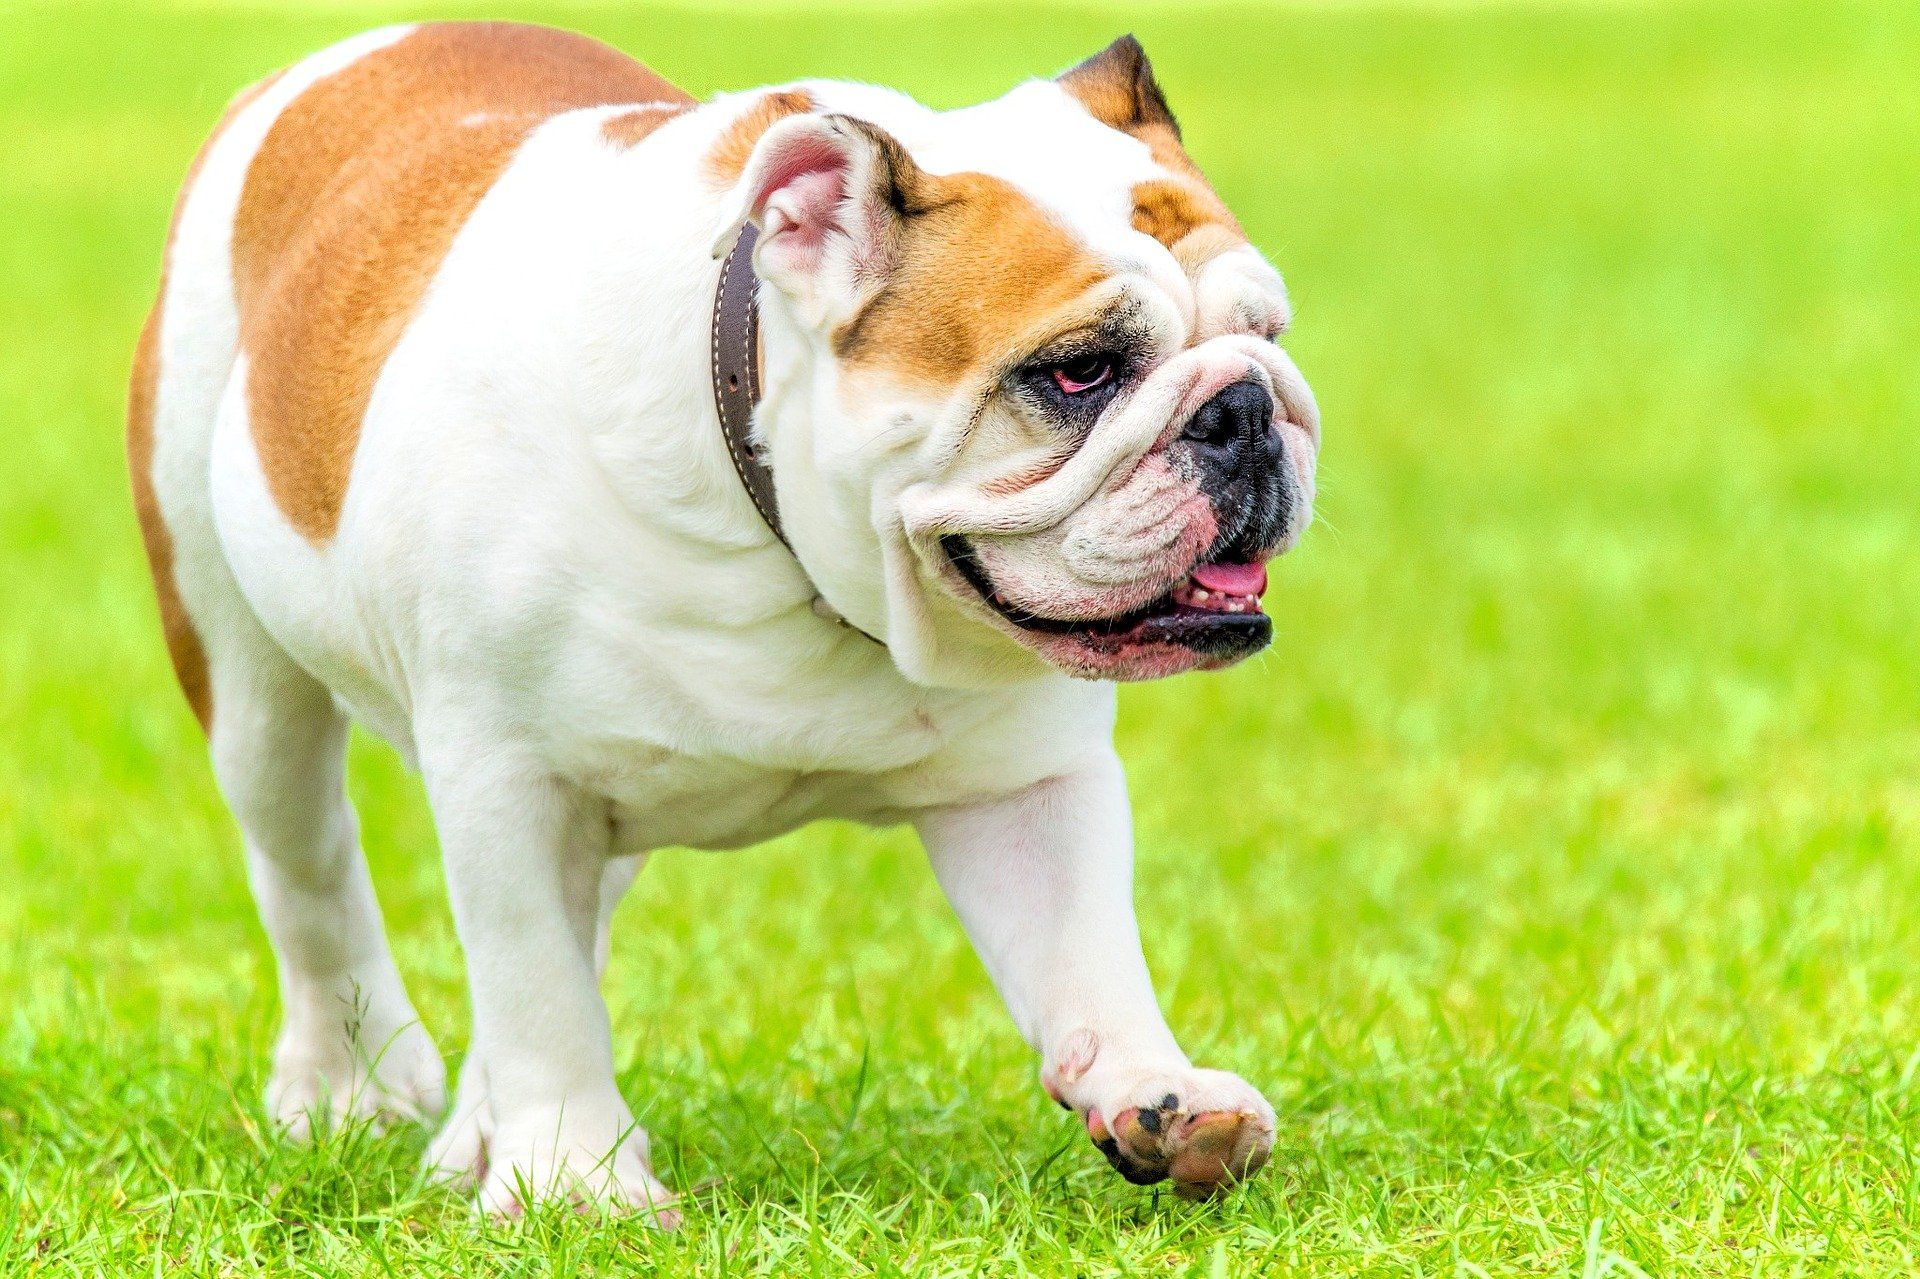 Bulldogs, pugs, french bulldogs are examples of brachycephalic dogs affected by BOAS